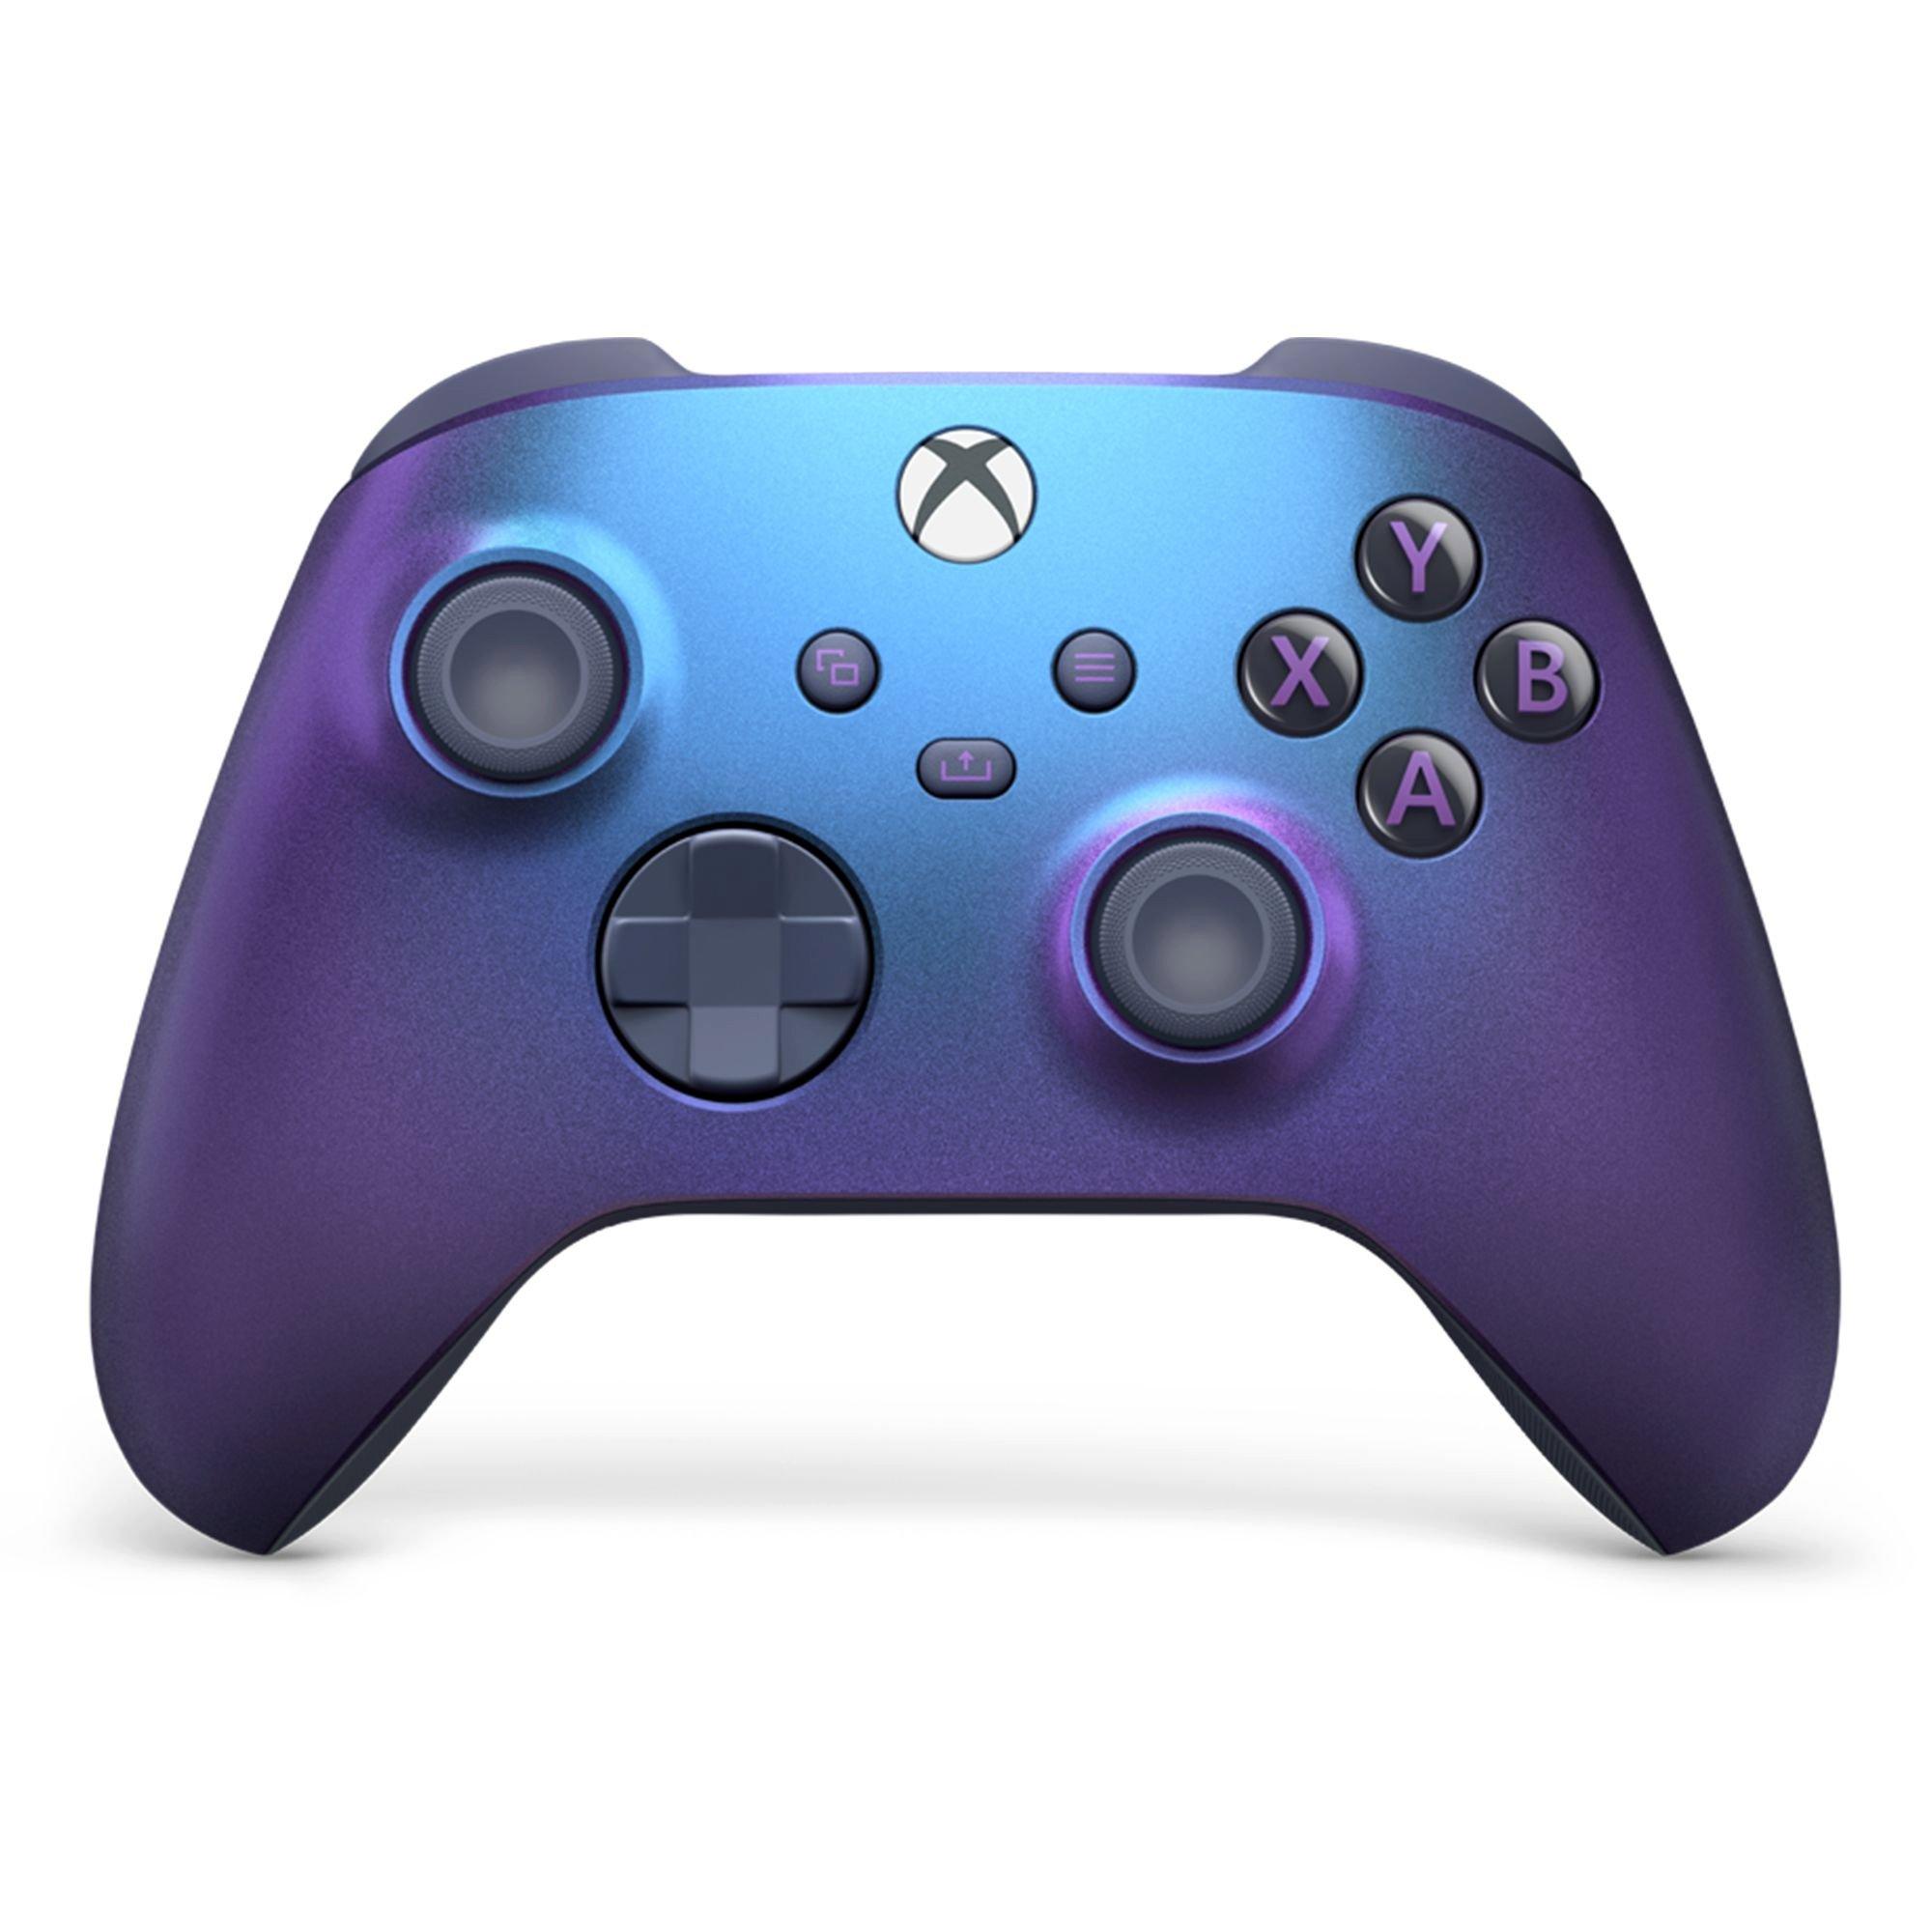 Microsoft Xbox Wireless Controller for Xbox Series X, Xbox Series S, Xbox  One, Windows Devices Stormcloud Vapor Special Edition QAU-00129 - Best Buy